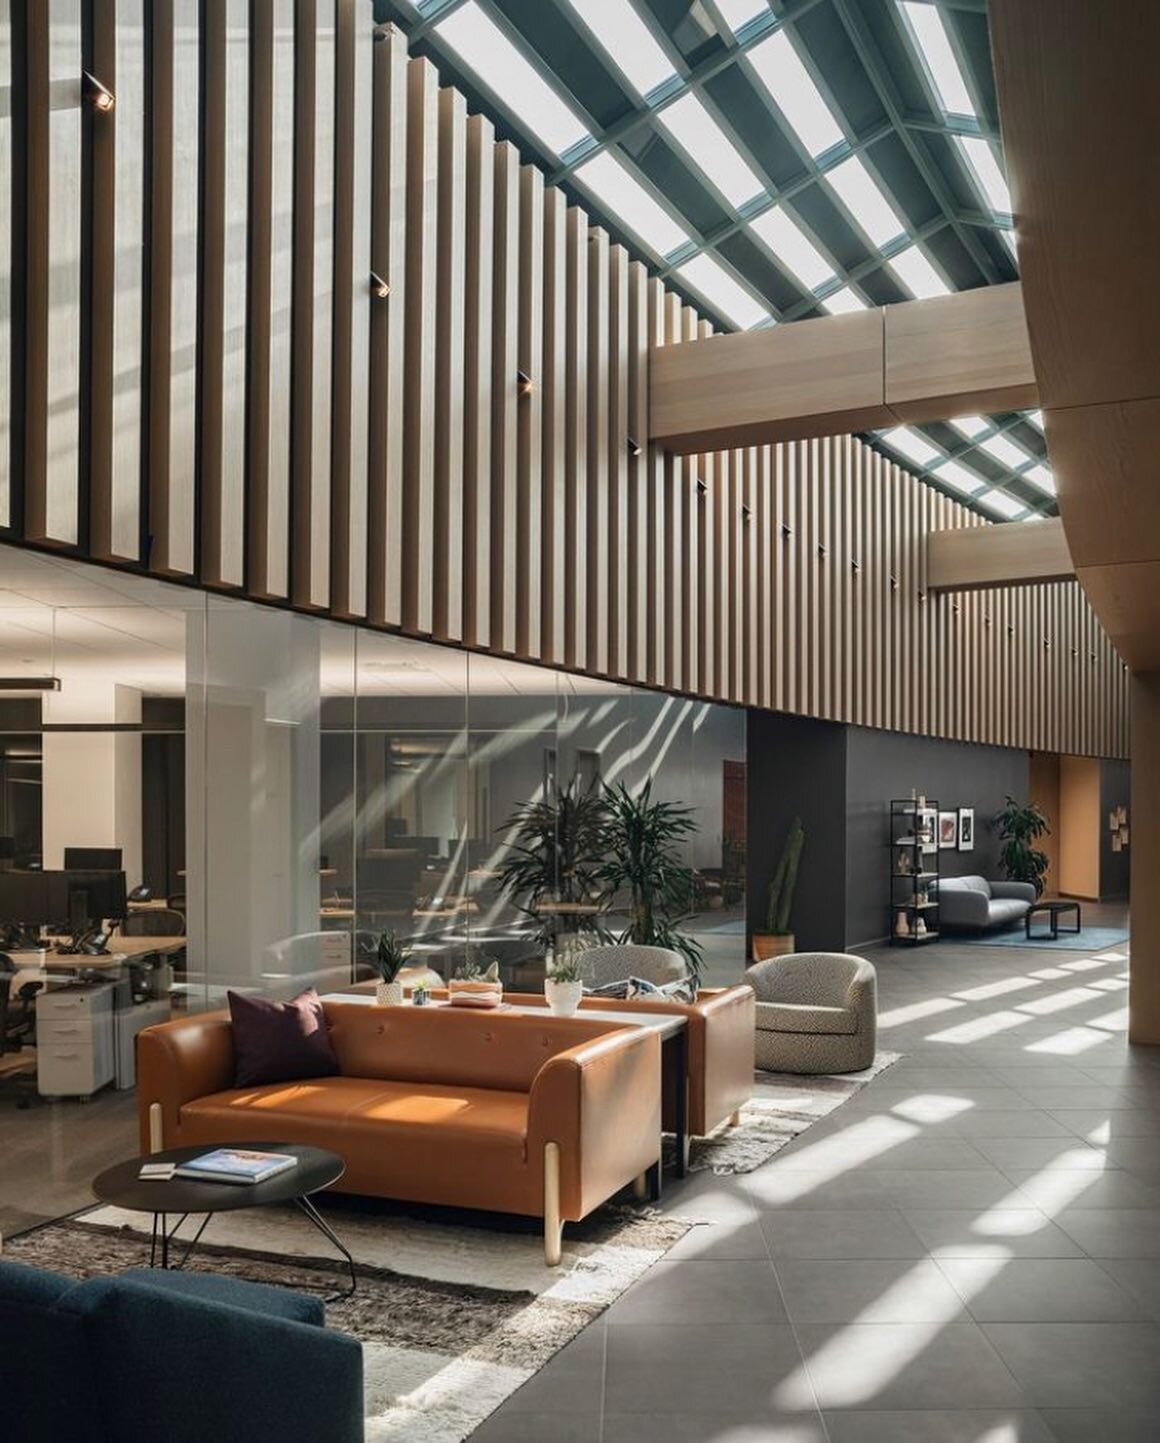 Repost from @edgequarters
 
Everyone had a part to play in this Award-Winning collaborative Scottsdale office design. Real Estate, Architects, Construction, Interior Design &amp; Furniture @cresaphoenix @corganinc @novoconstruction @edgequarters #EQ 